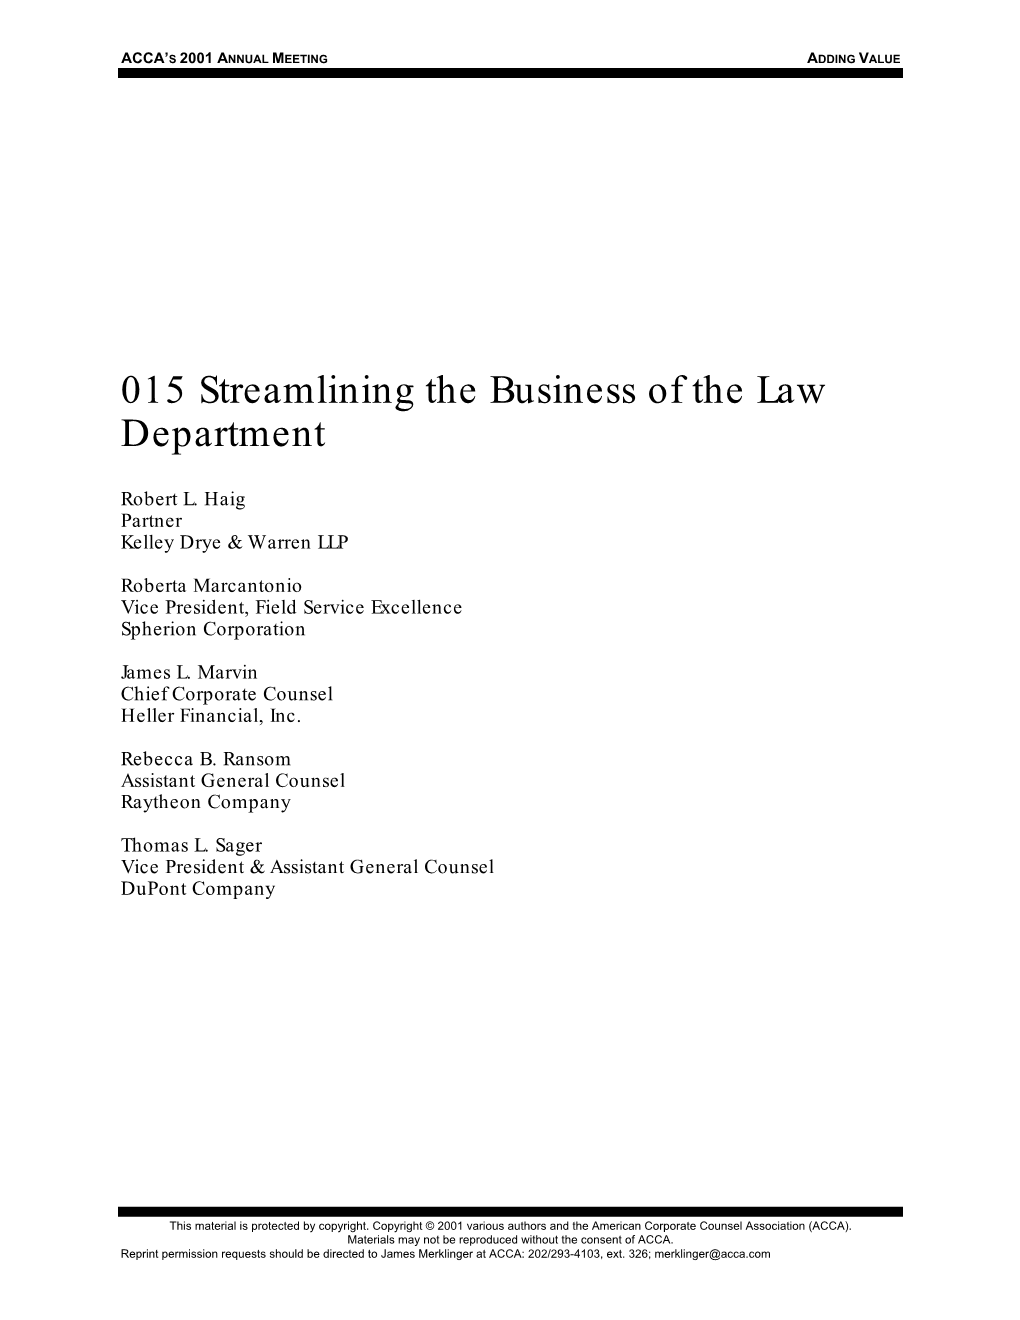 015 Streamlining the Business of the Law Department